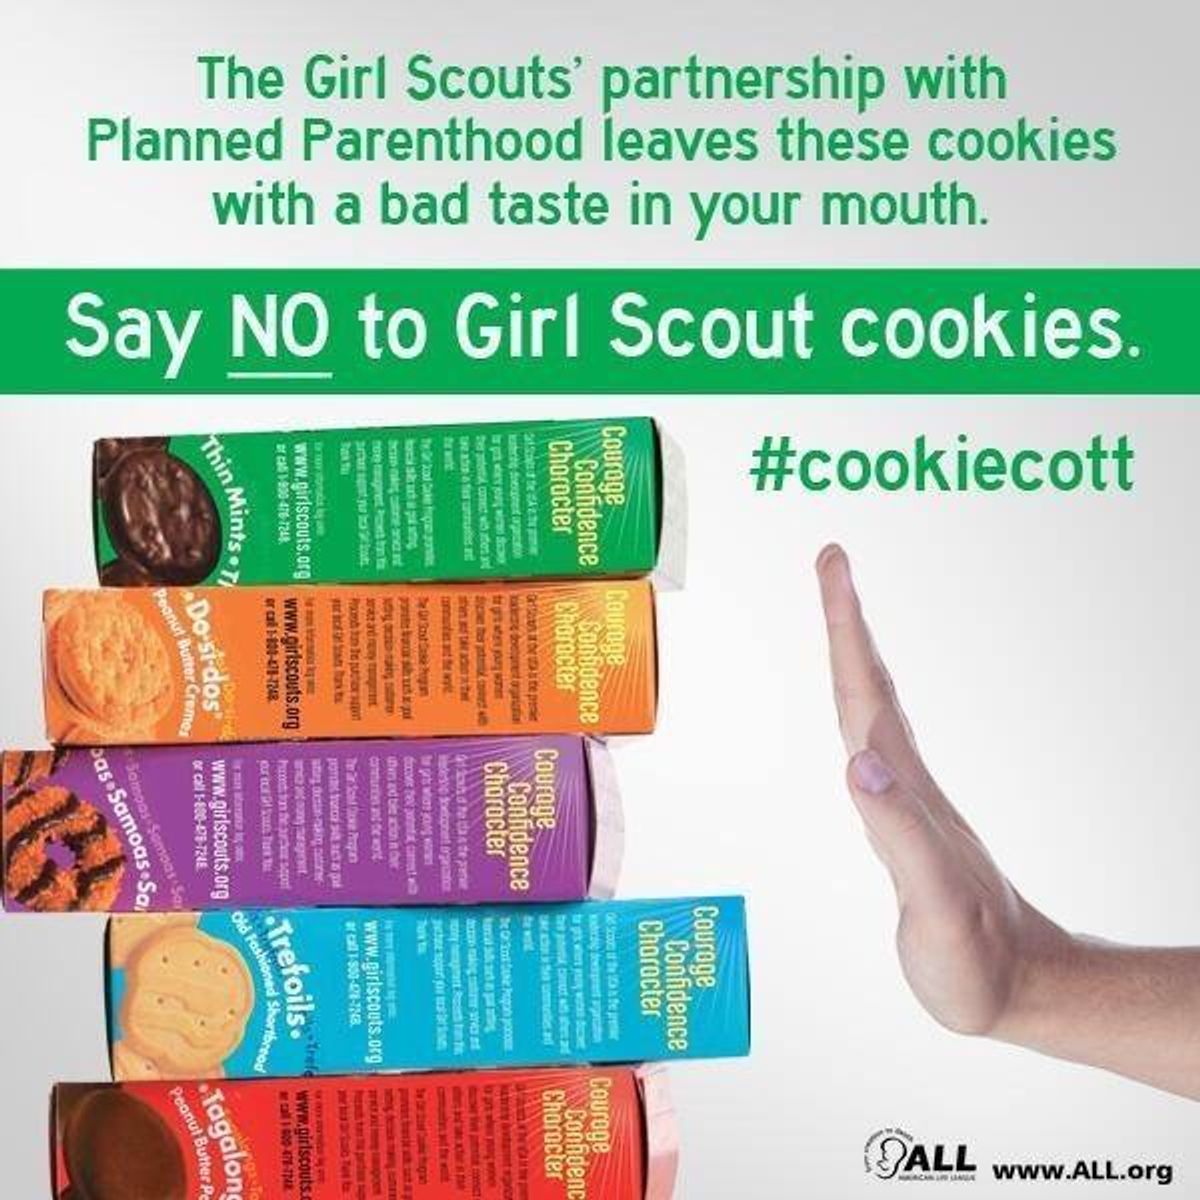 Do Girl Scout Cookie Proceeds Fund Planned Parenthood? Snopes